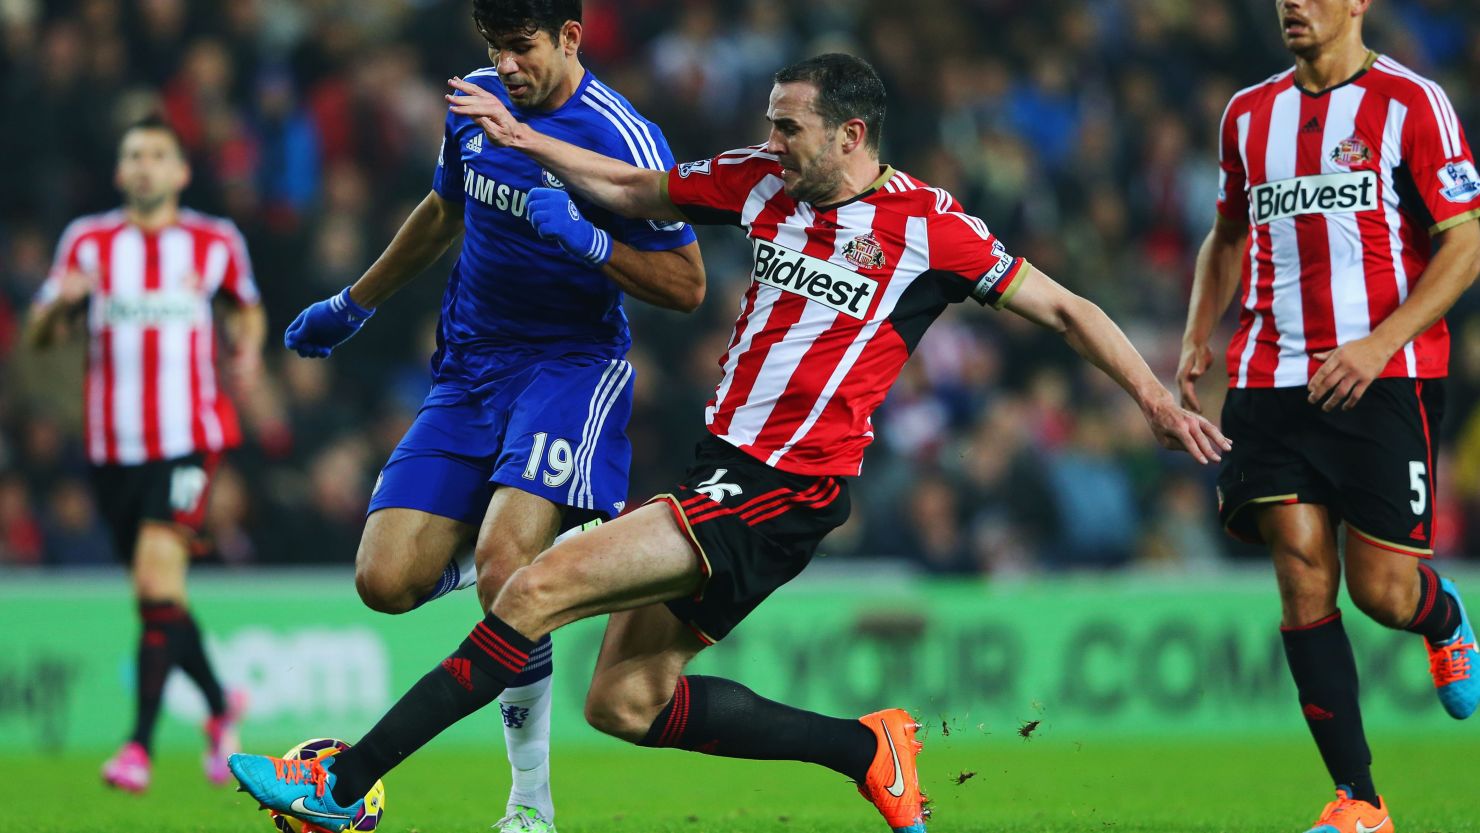  John O'Shea of Sunderland challenges Diego Costa of Chelsea during the English Premier League match between Sunderland and Chelsea.